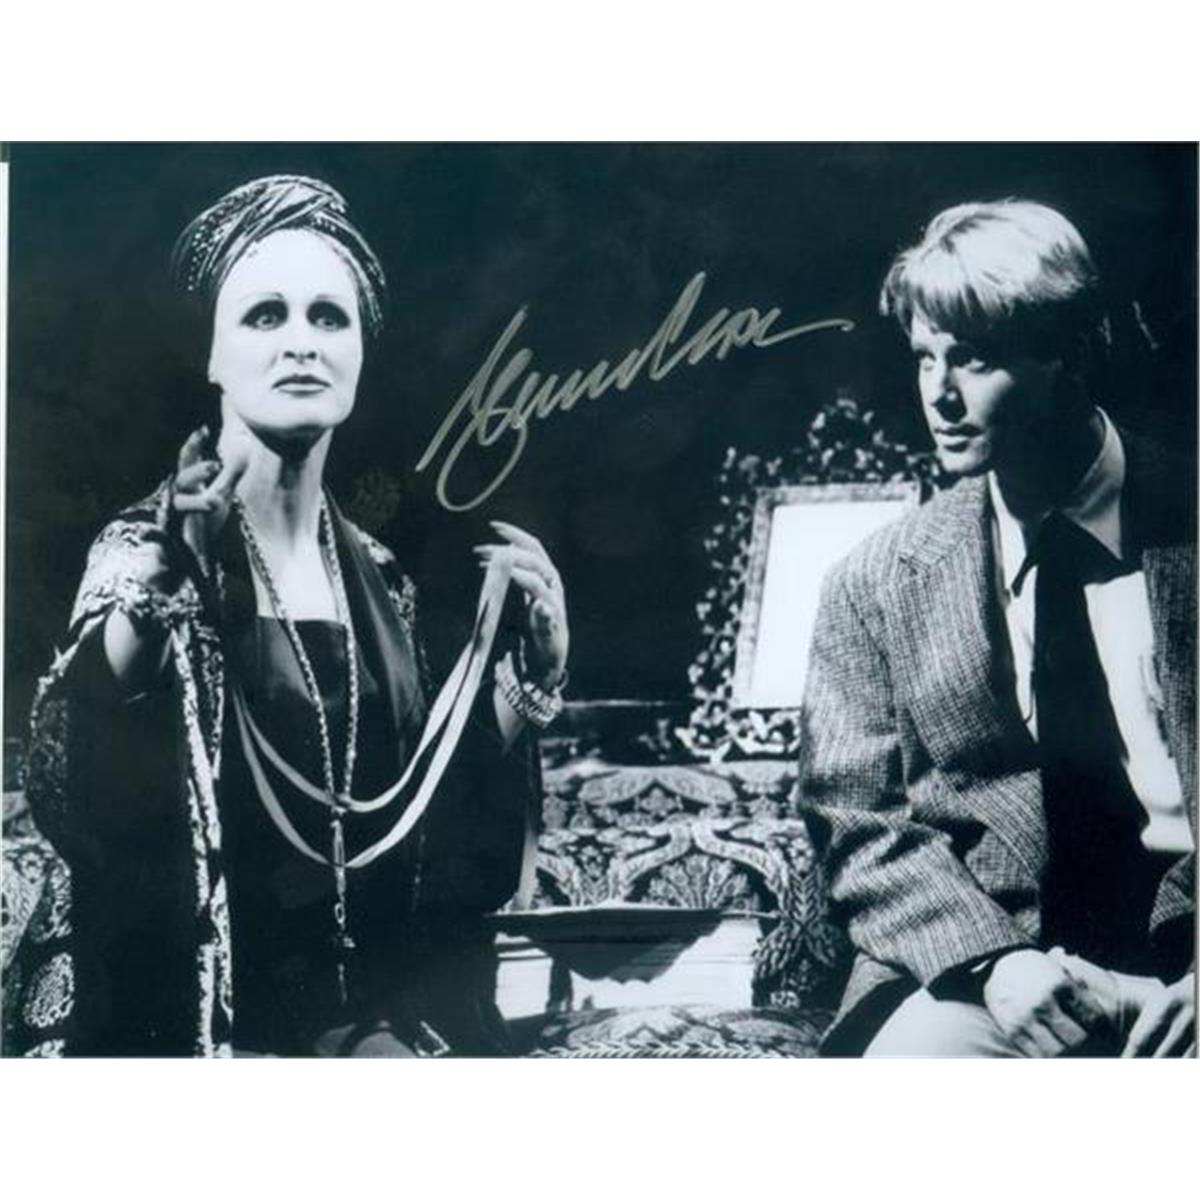 377994 8 x 10 in. Glenn Close Autographed Photo - B&W Actress - The Natural-1 -  Autograph Warehouse